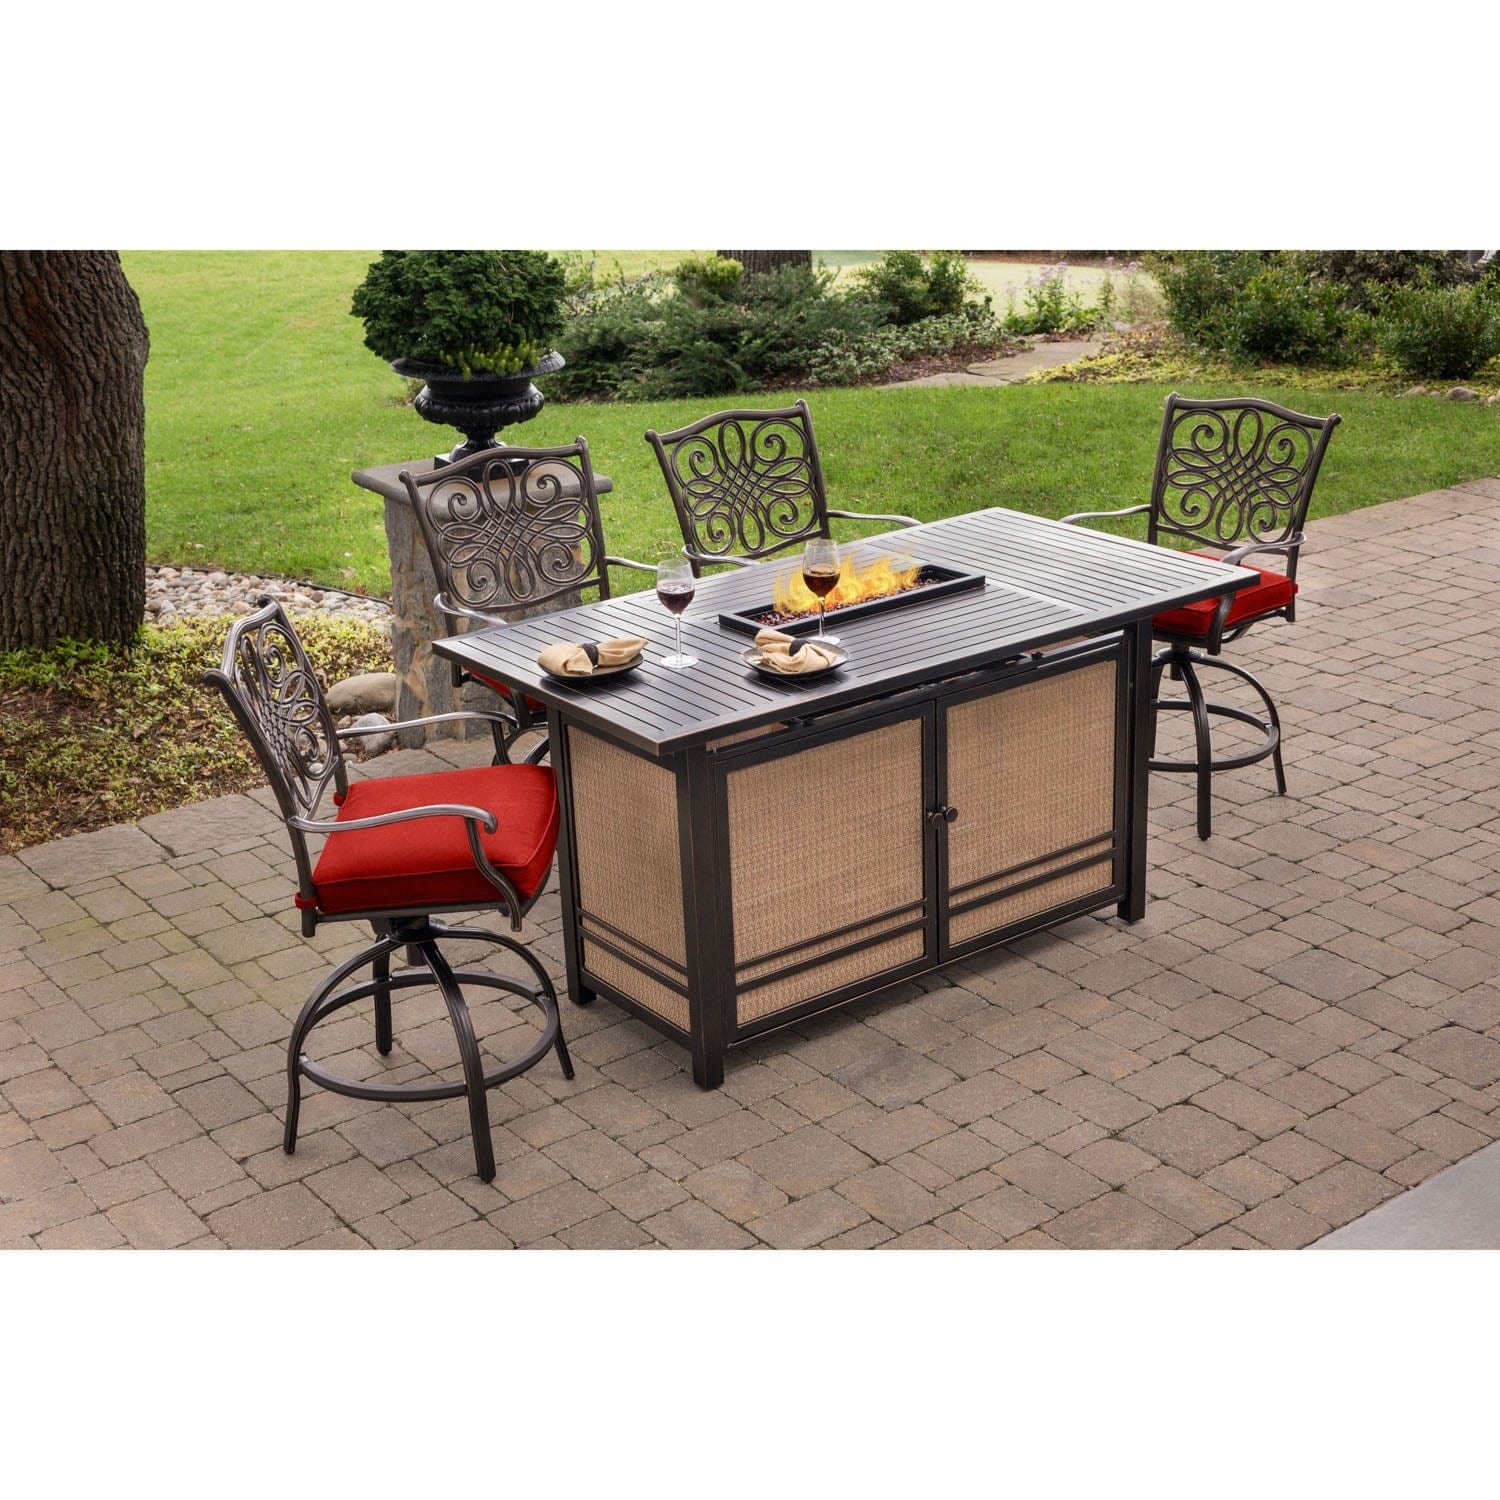 Hanover Fire Pit Dining Set Hanover - Traditions5pc Fire Pit High Dining: 4 Counter Swivel Rockers, 1 Fire Pit Table | Red/Bronze | TRAD5PCFPBR-RED